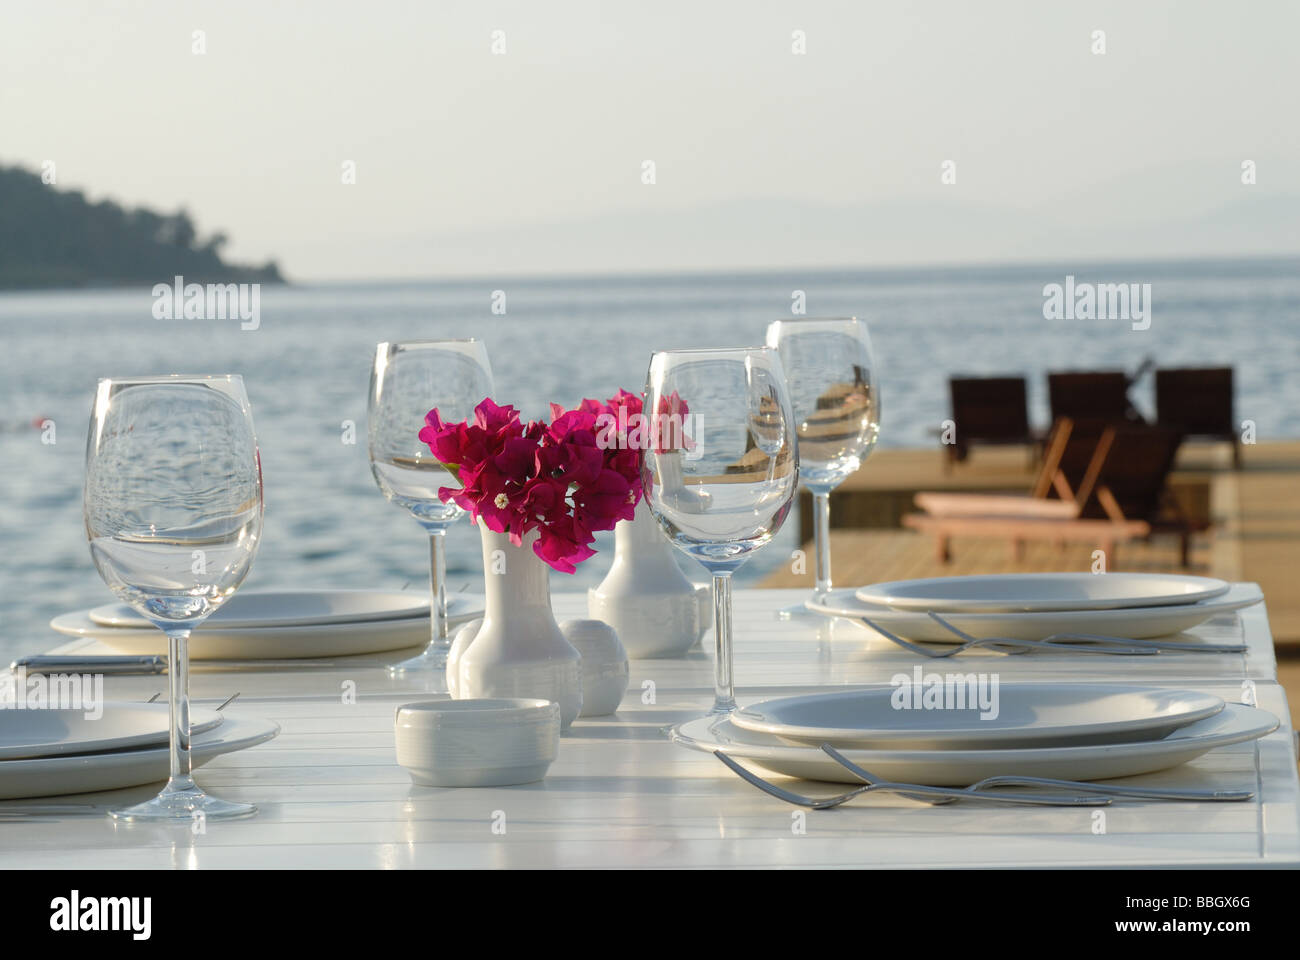 dinner table and nice place setting at the beach restaurant Stock Photo